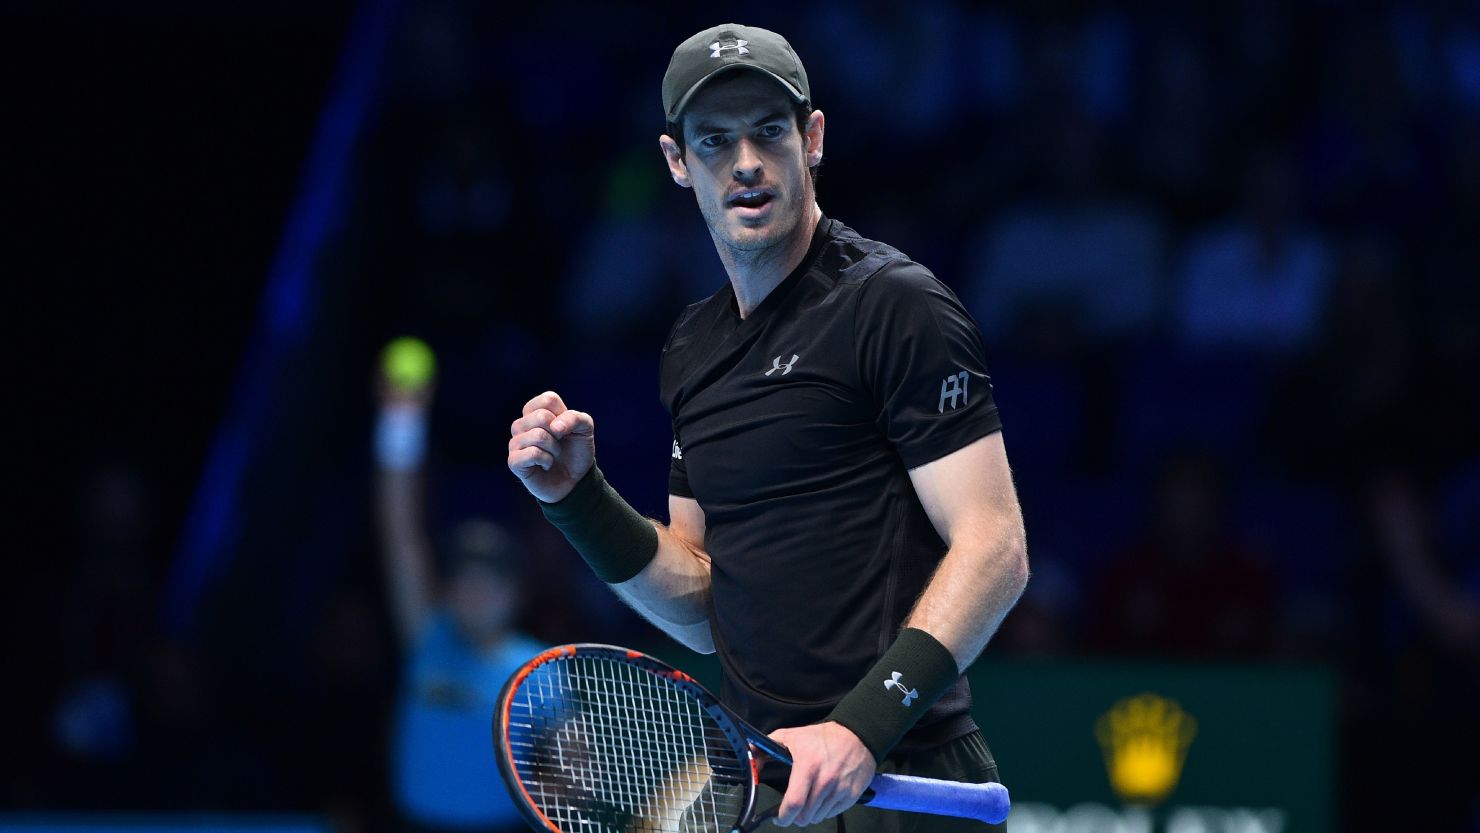 Andy Murray extended his winning streak to 23 matches and reached the final of the World Tour Finals. 